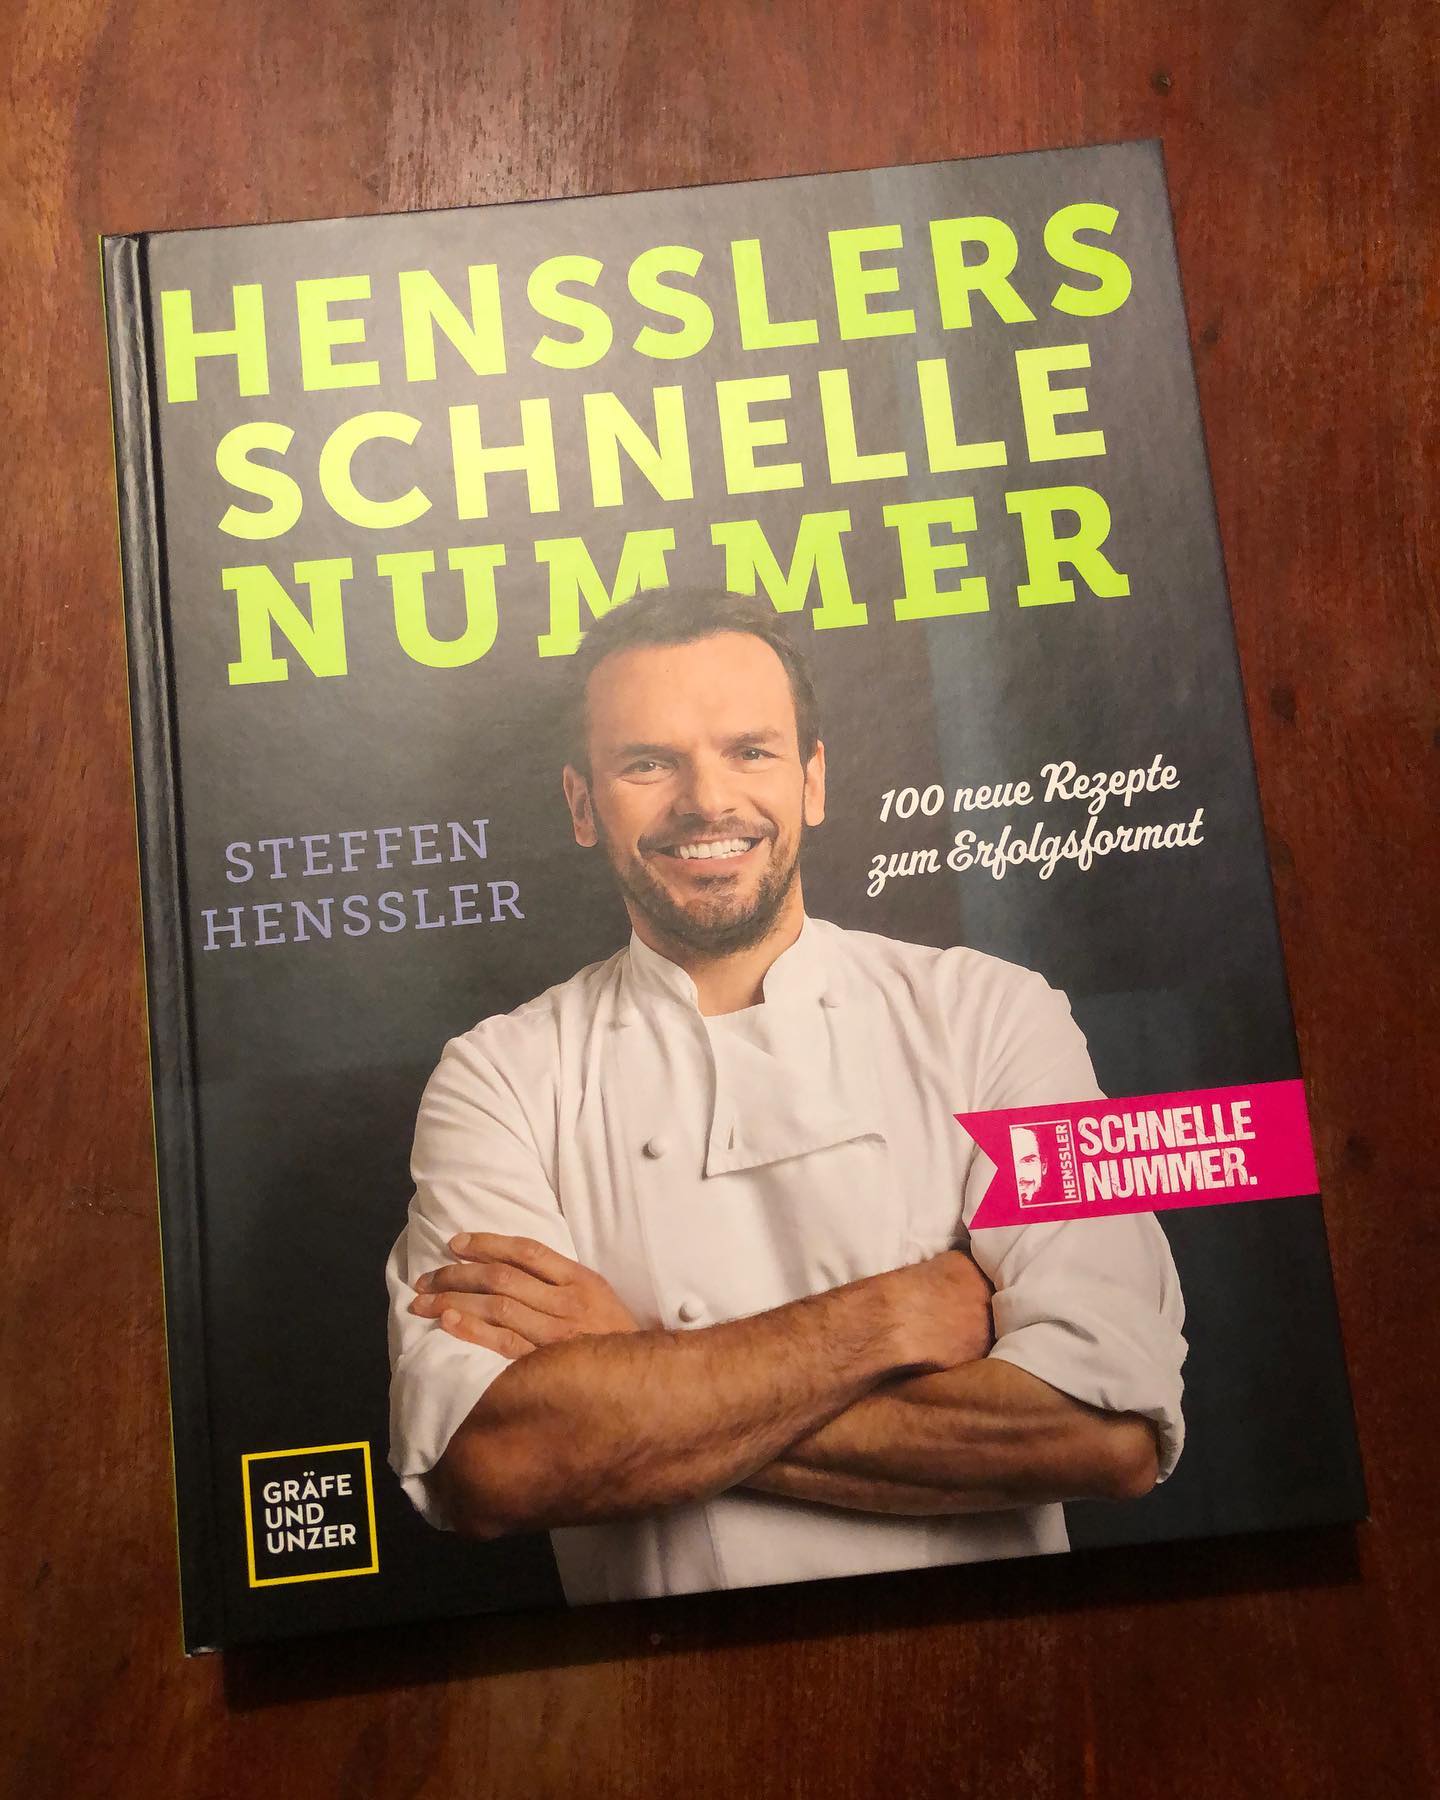 As a BBQ freak I’m always in search of new inspiration. As a fan of the YouTube channel I decided to get the book too.
Best cookbook ever.  Not sponsored or something similar! I just bought it on my own.
#steffenhenssler